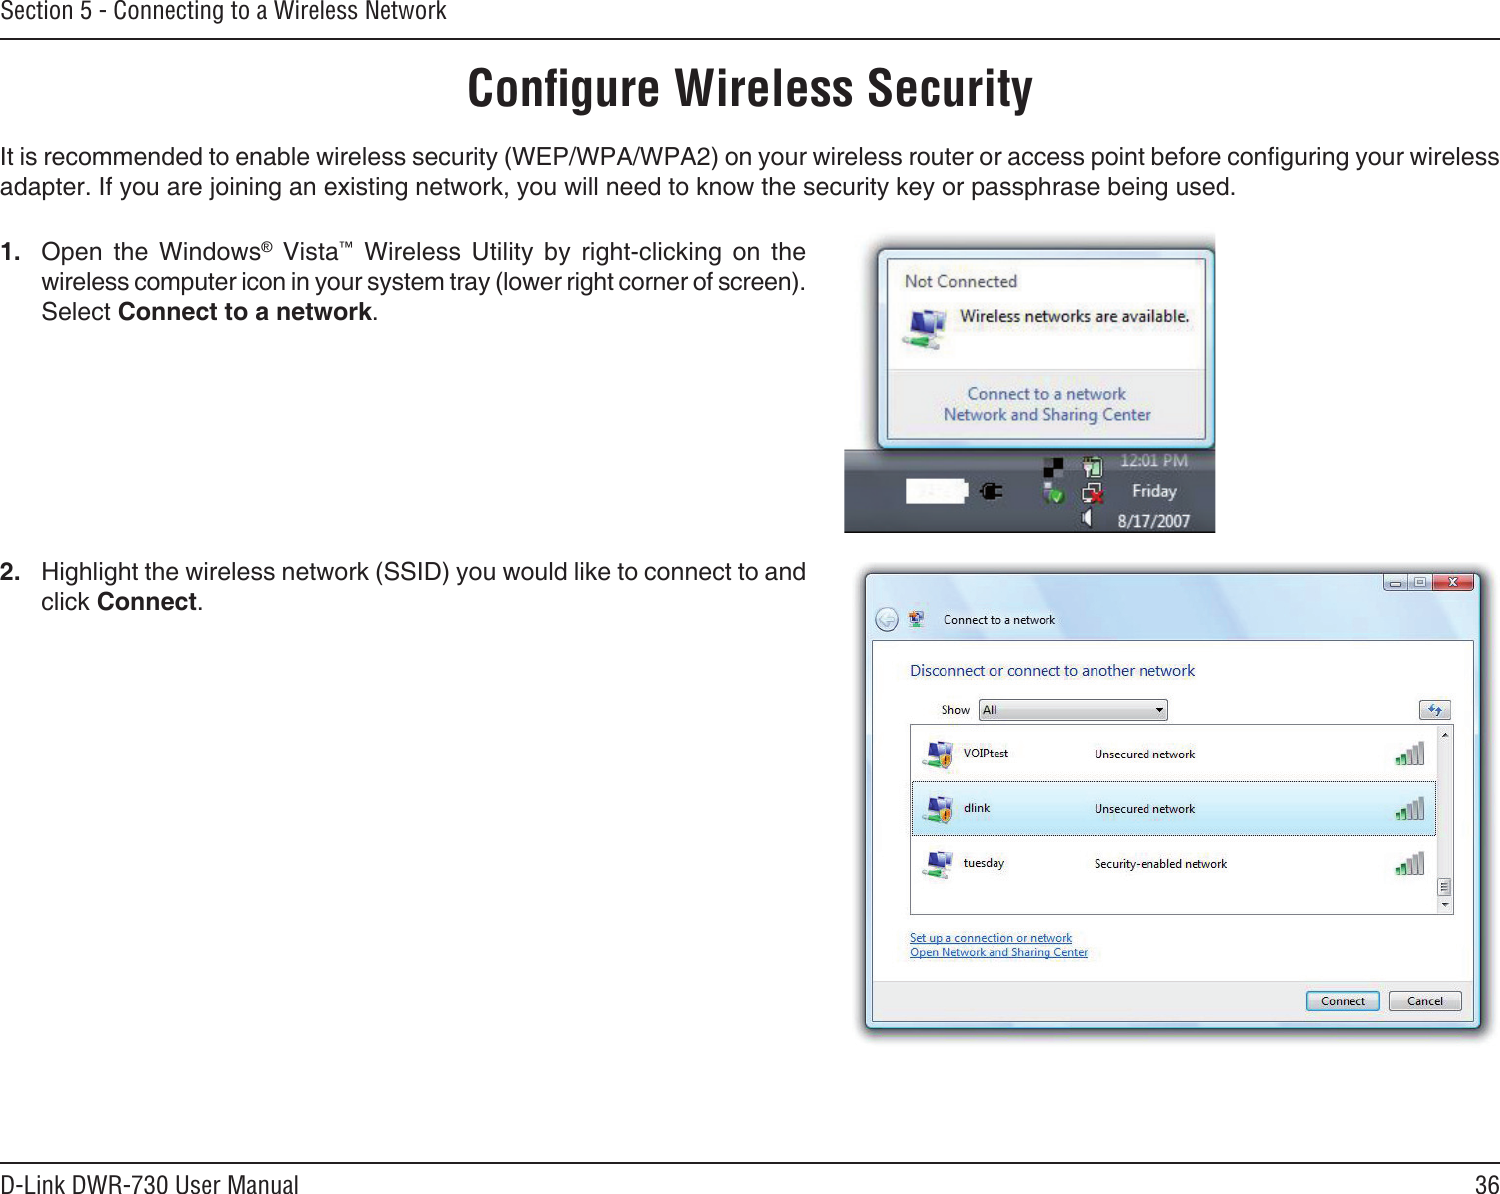 36D-Link DWR-730 User ManualSection 5 - Connecting to a Wireless NetworkConﬁgure Wireless Security           